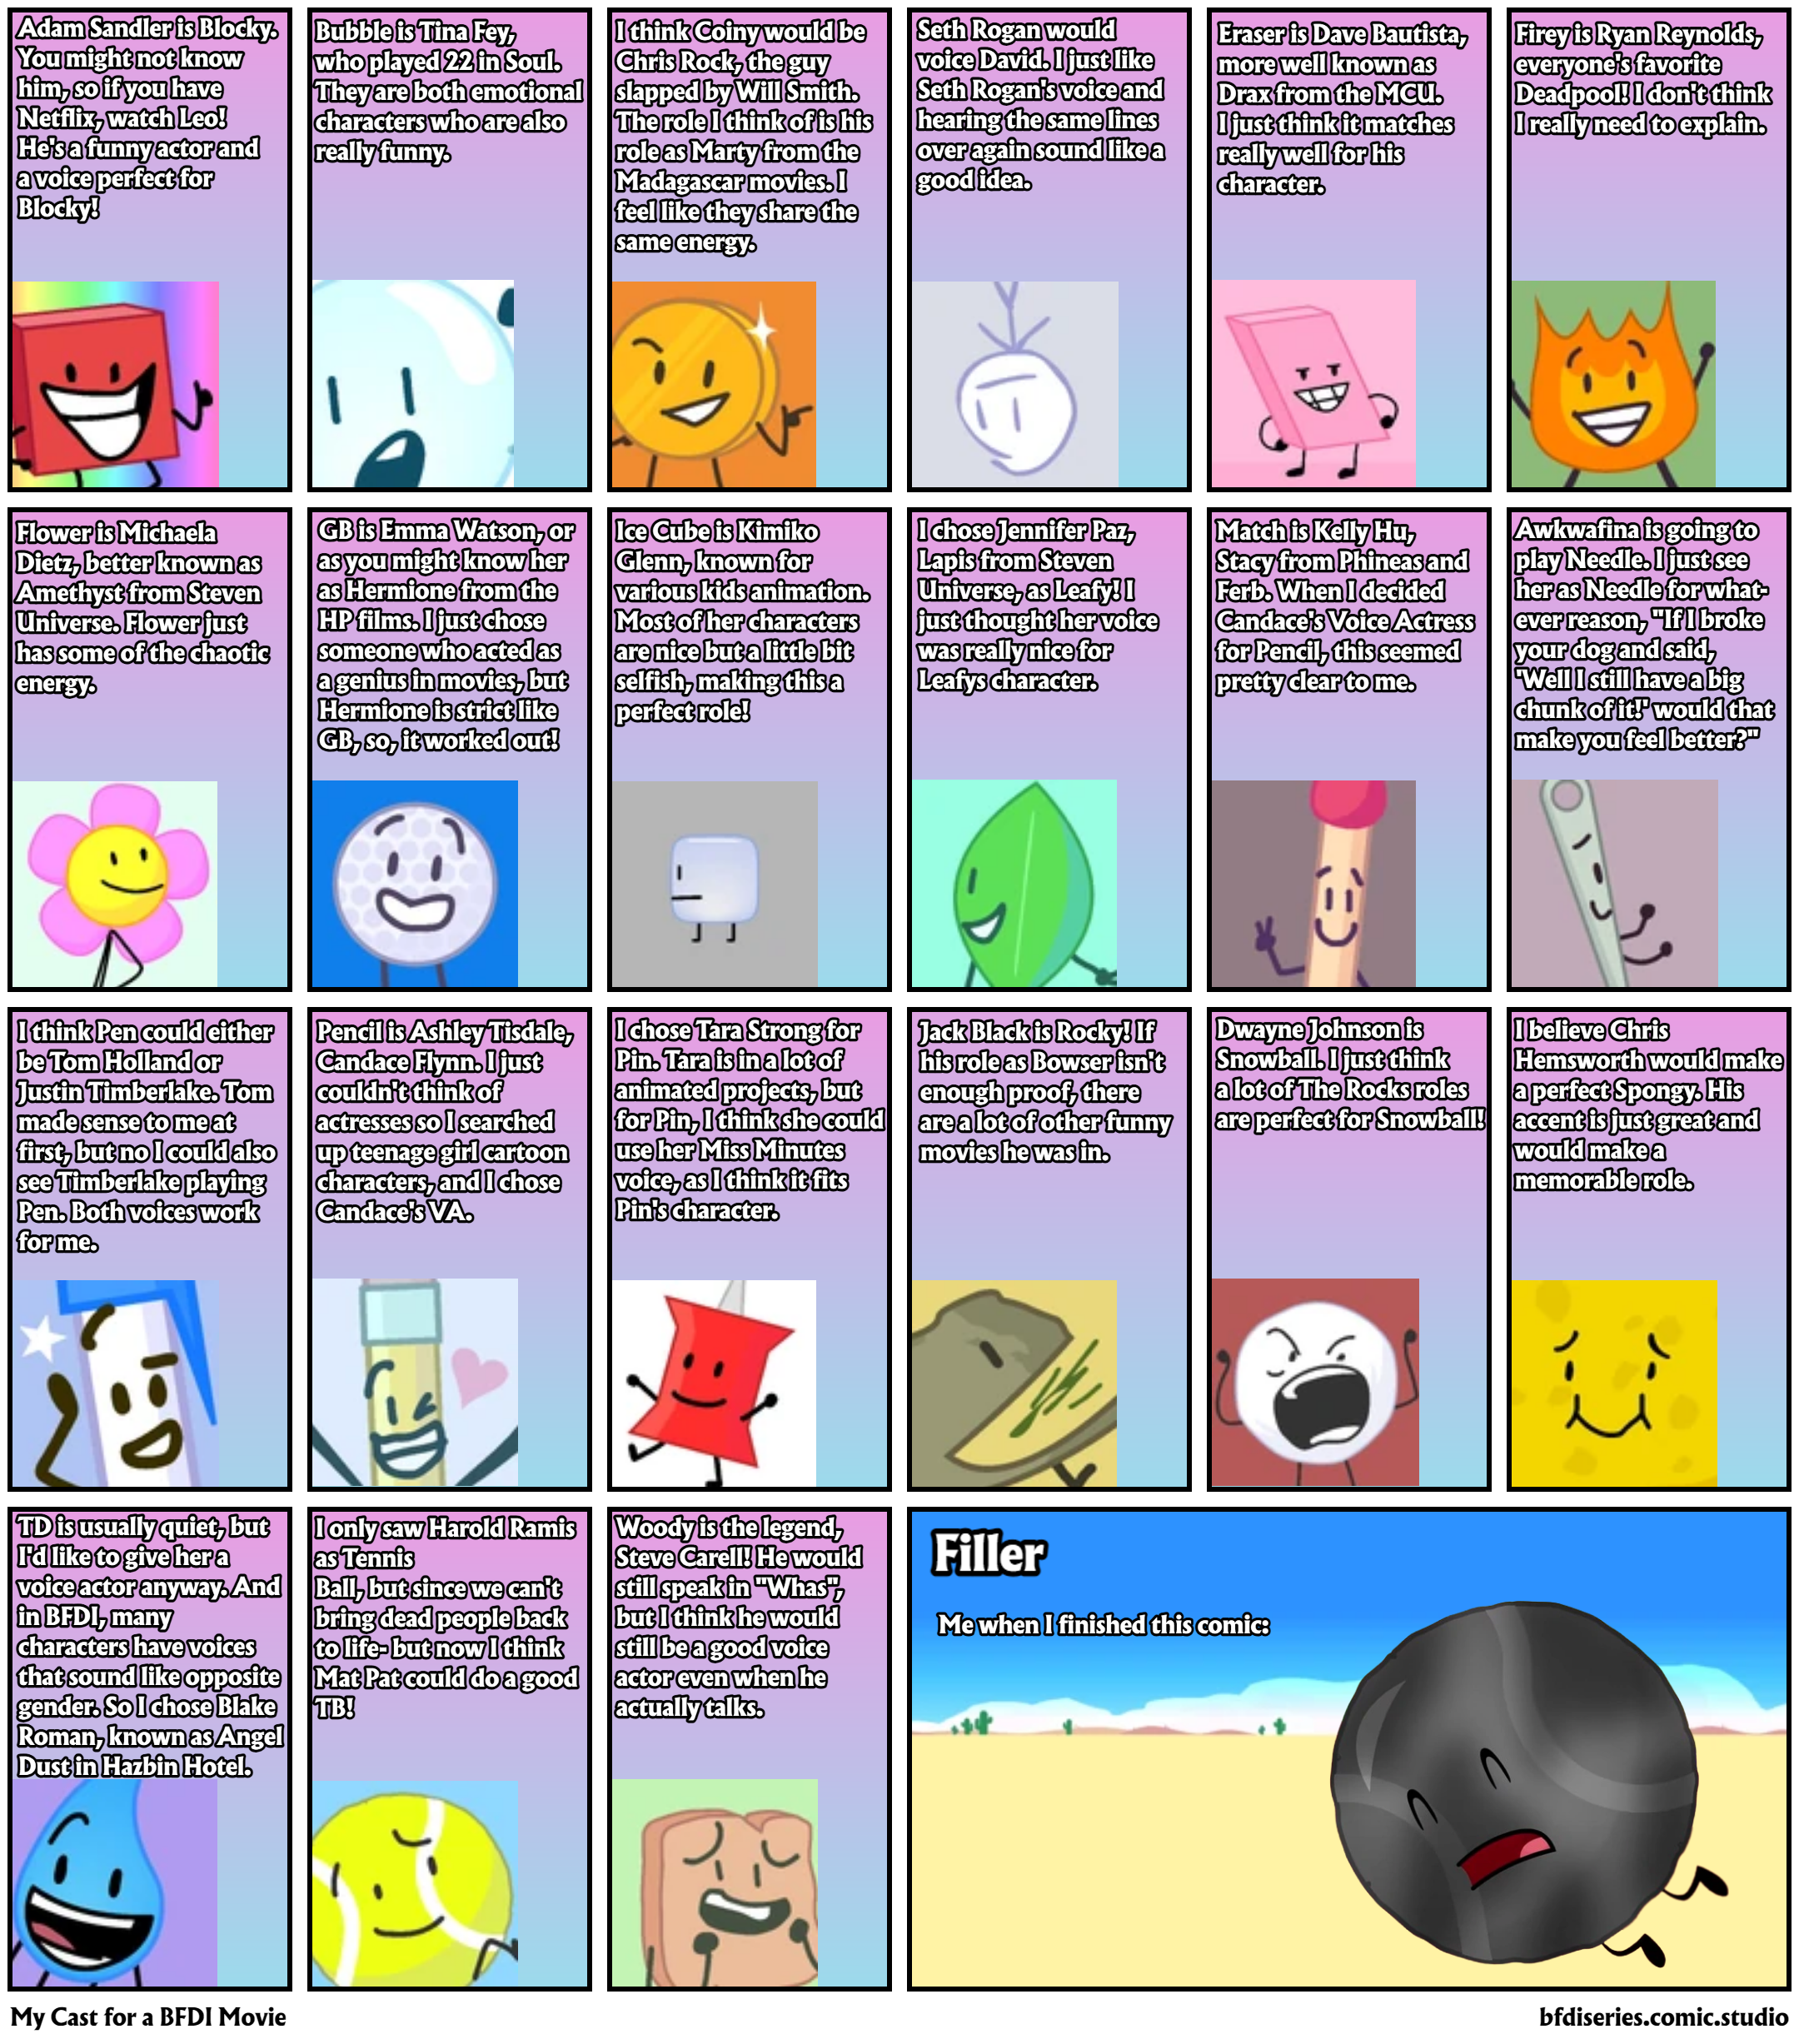 My Cast for a BFDI Movie